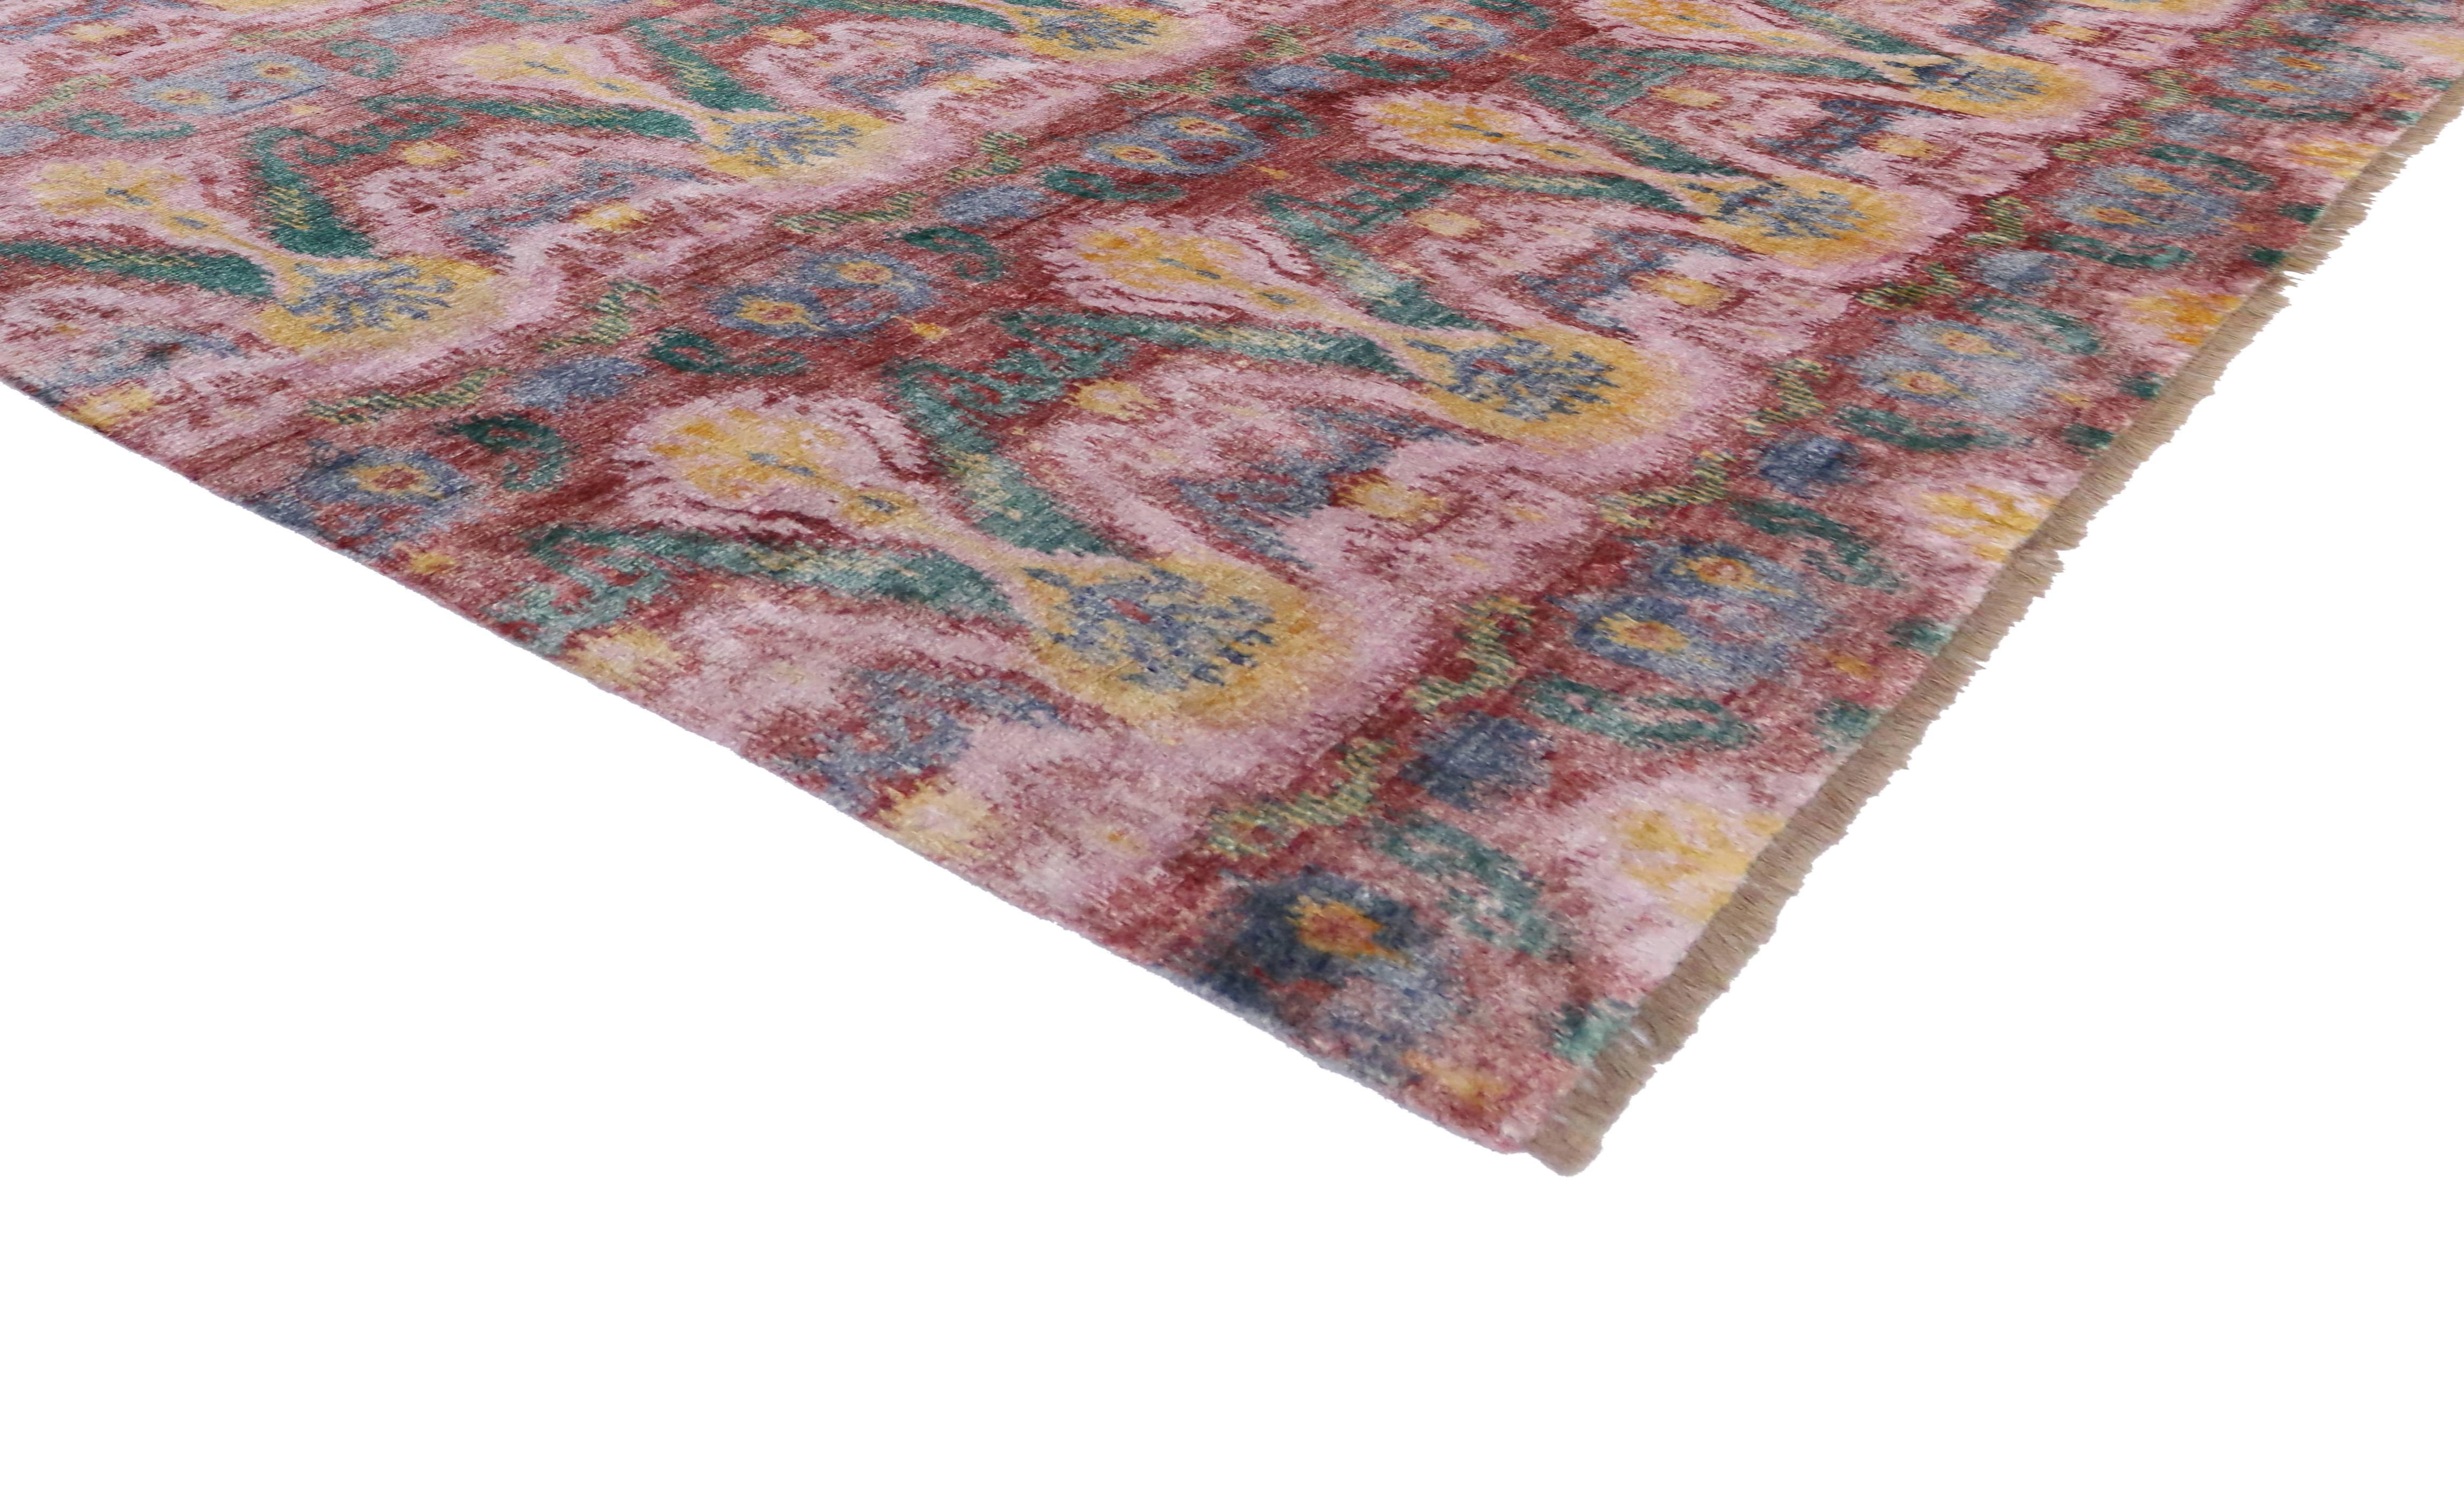 This exotic Ikat motif with its ancient roots looks fresher than ever. Energize your space and add a designer touch to your transitional or contemporary styled living room, office or bedroom. Colors include blue hues, shades of red, pink, yellow and